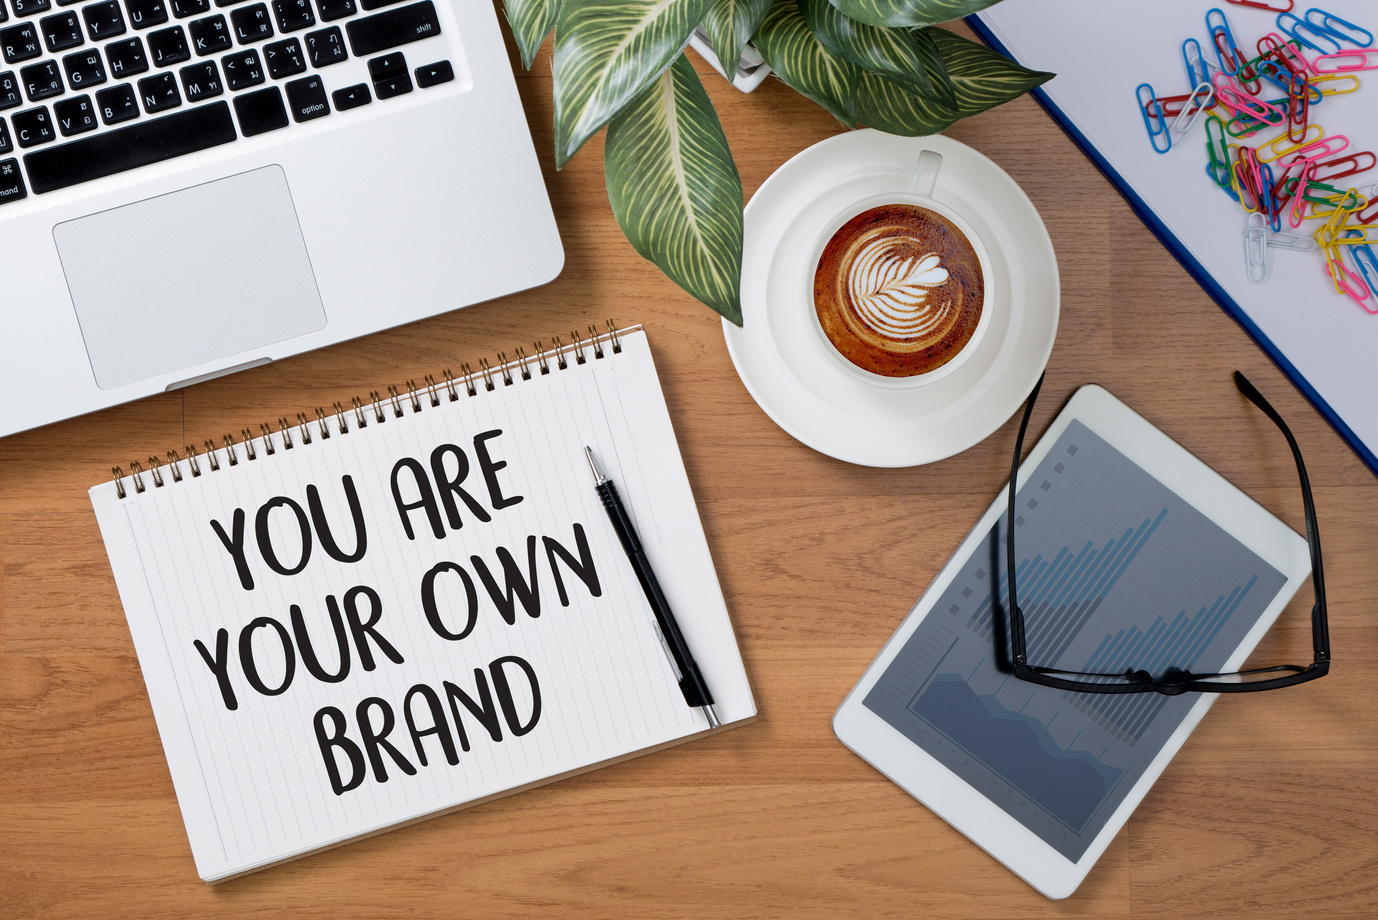 YOU ARE YOUR OWN BRAND  Brand Building concept